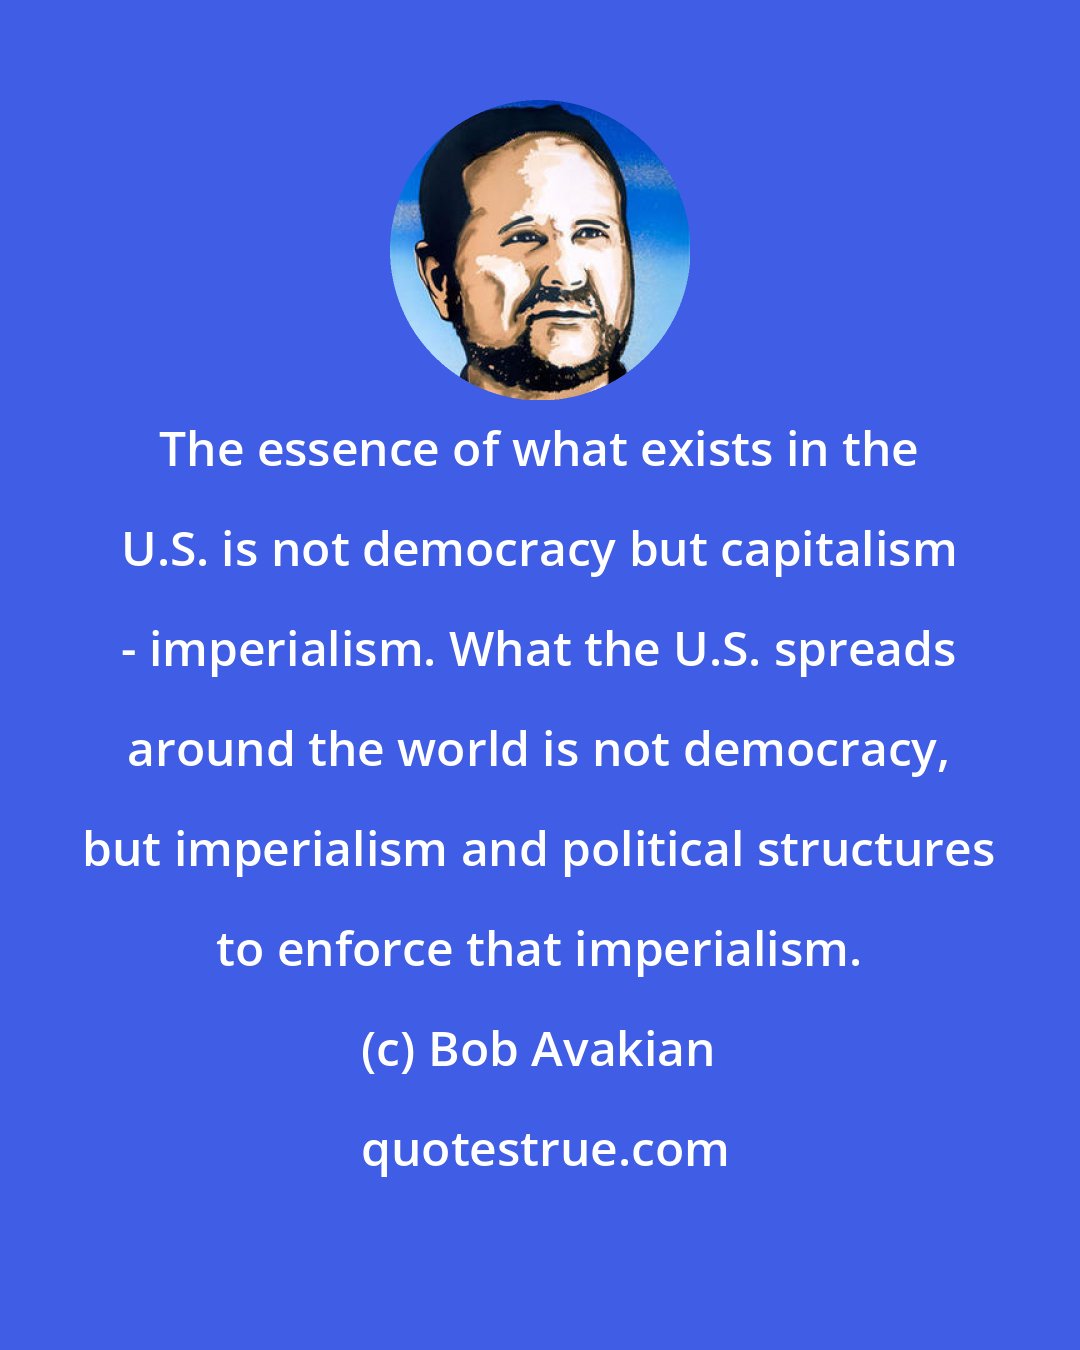 Bob Avakian: The essence of what exists in the U.S. is not democracy but capitalism - imperialism. What the U.S. spreads around the world is not democracy, but imperialism and political structures to enforce that imperialism.